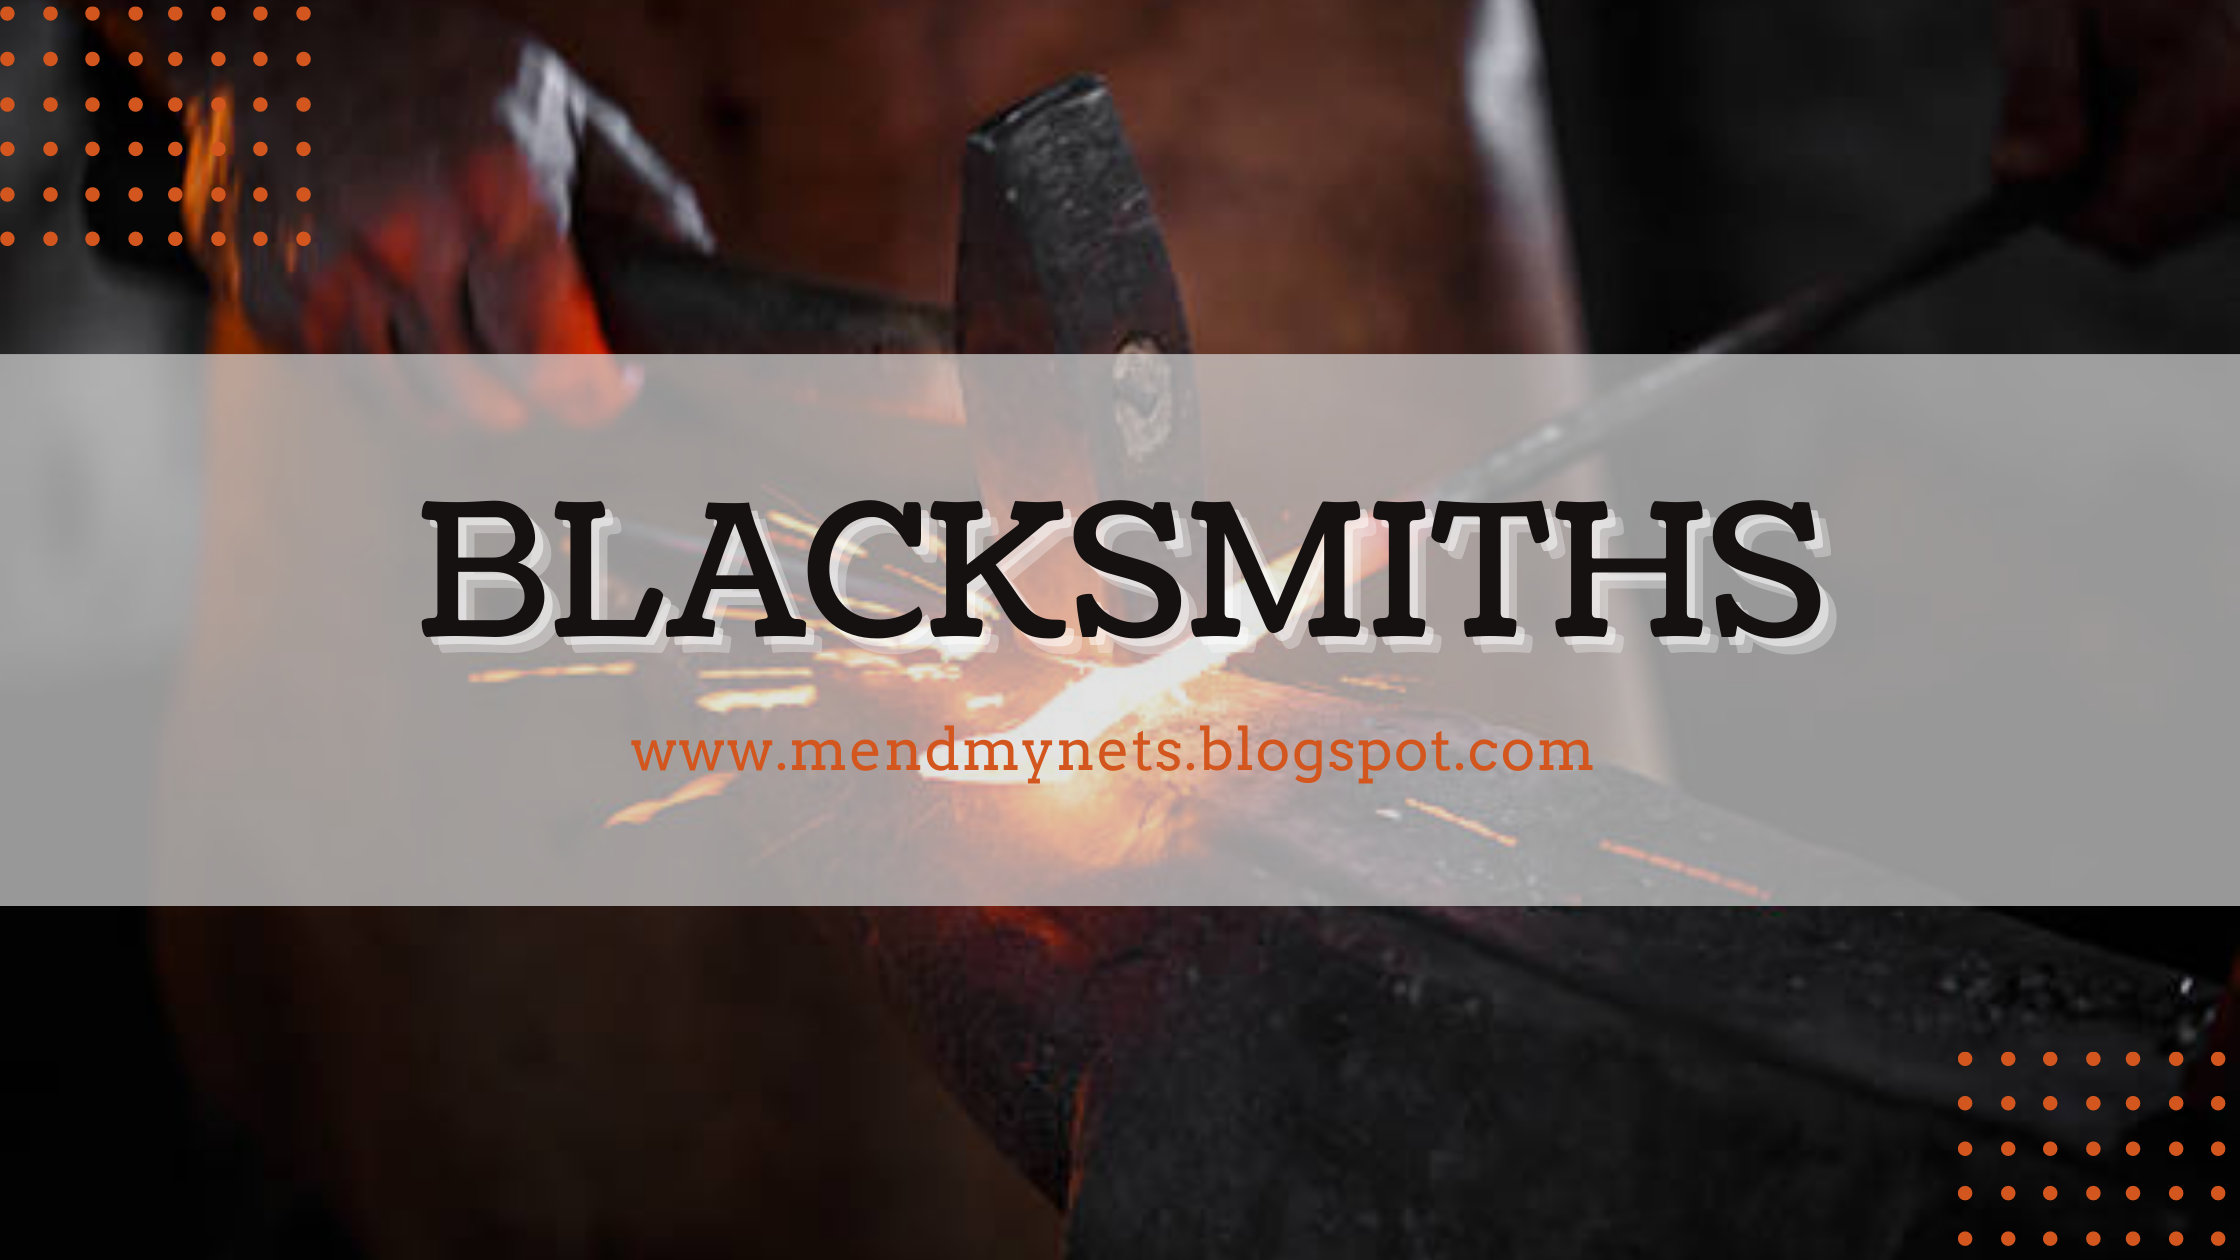 BLACKSMITHS: The Need for Mentorship and Good Training